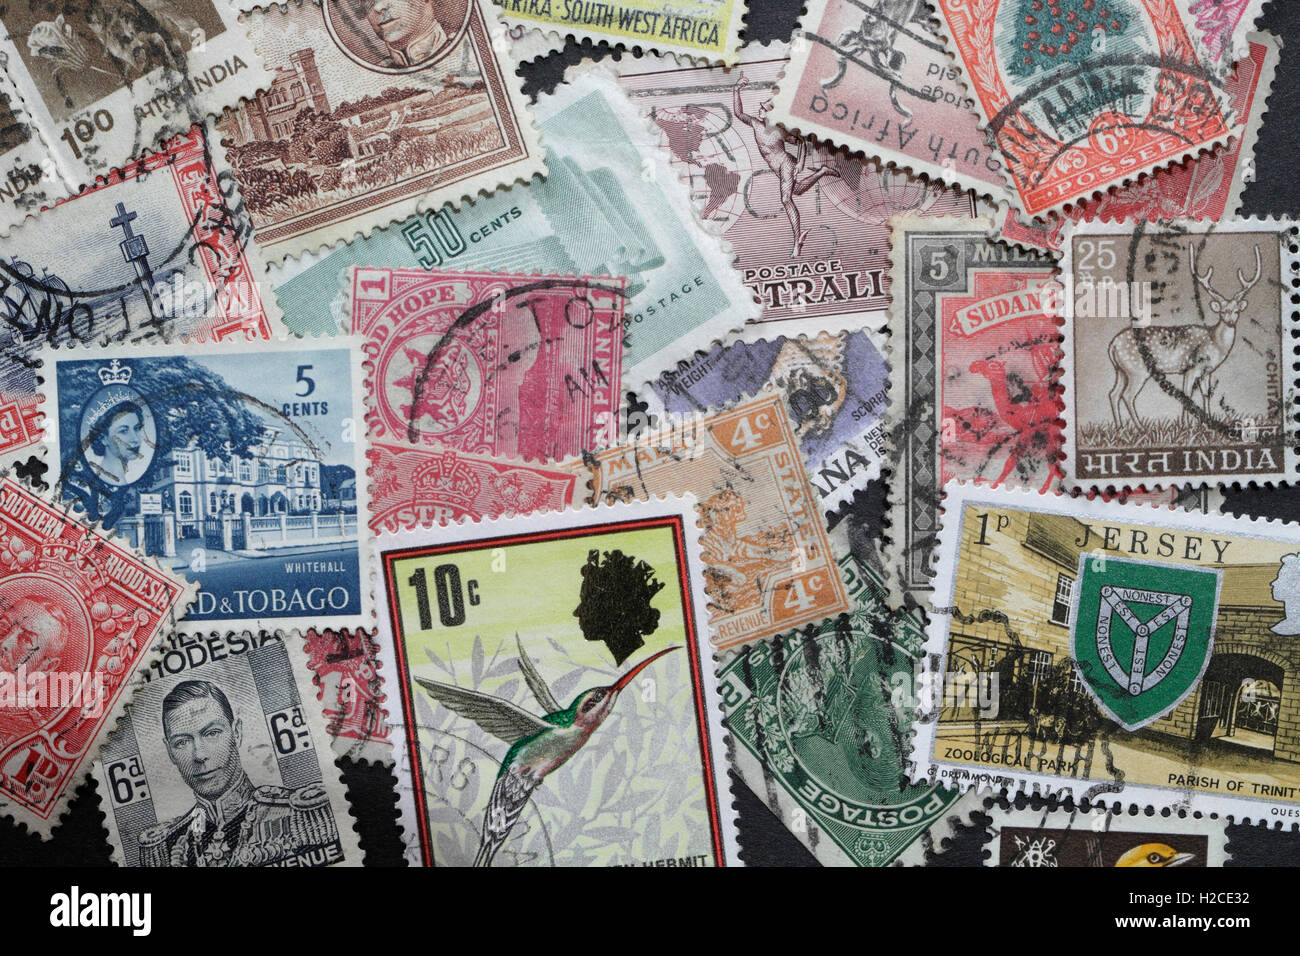 Commonwealth British Empire Postage Stamps, stamp collecting hobby Stock Photo